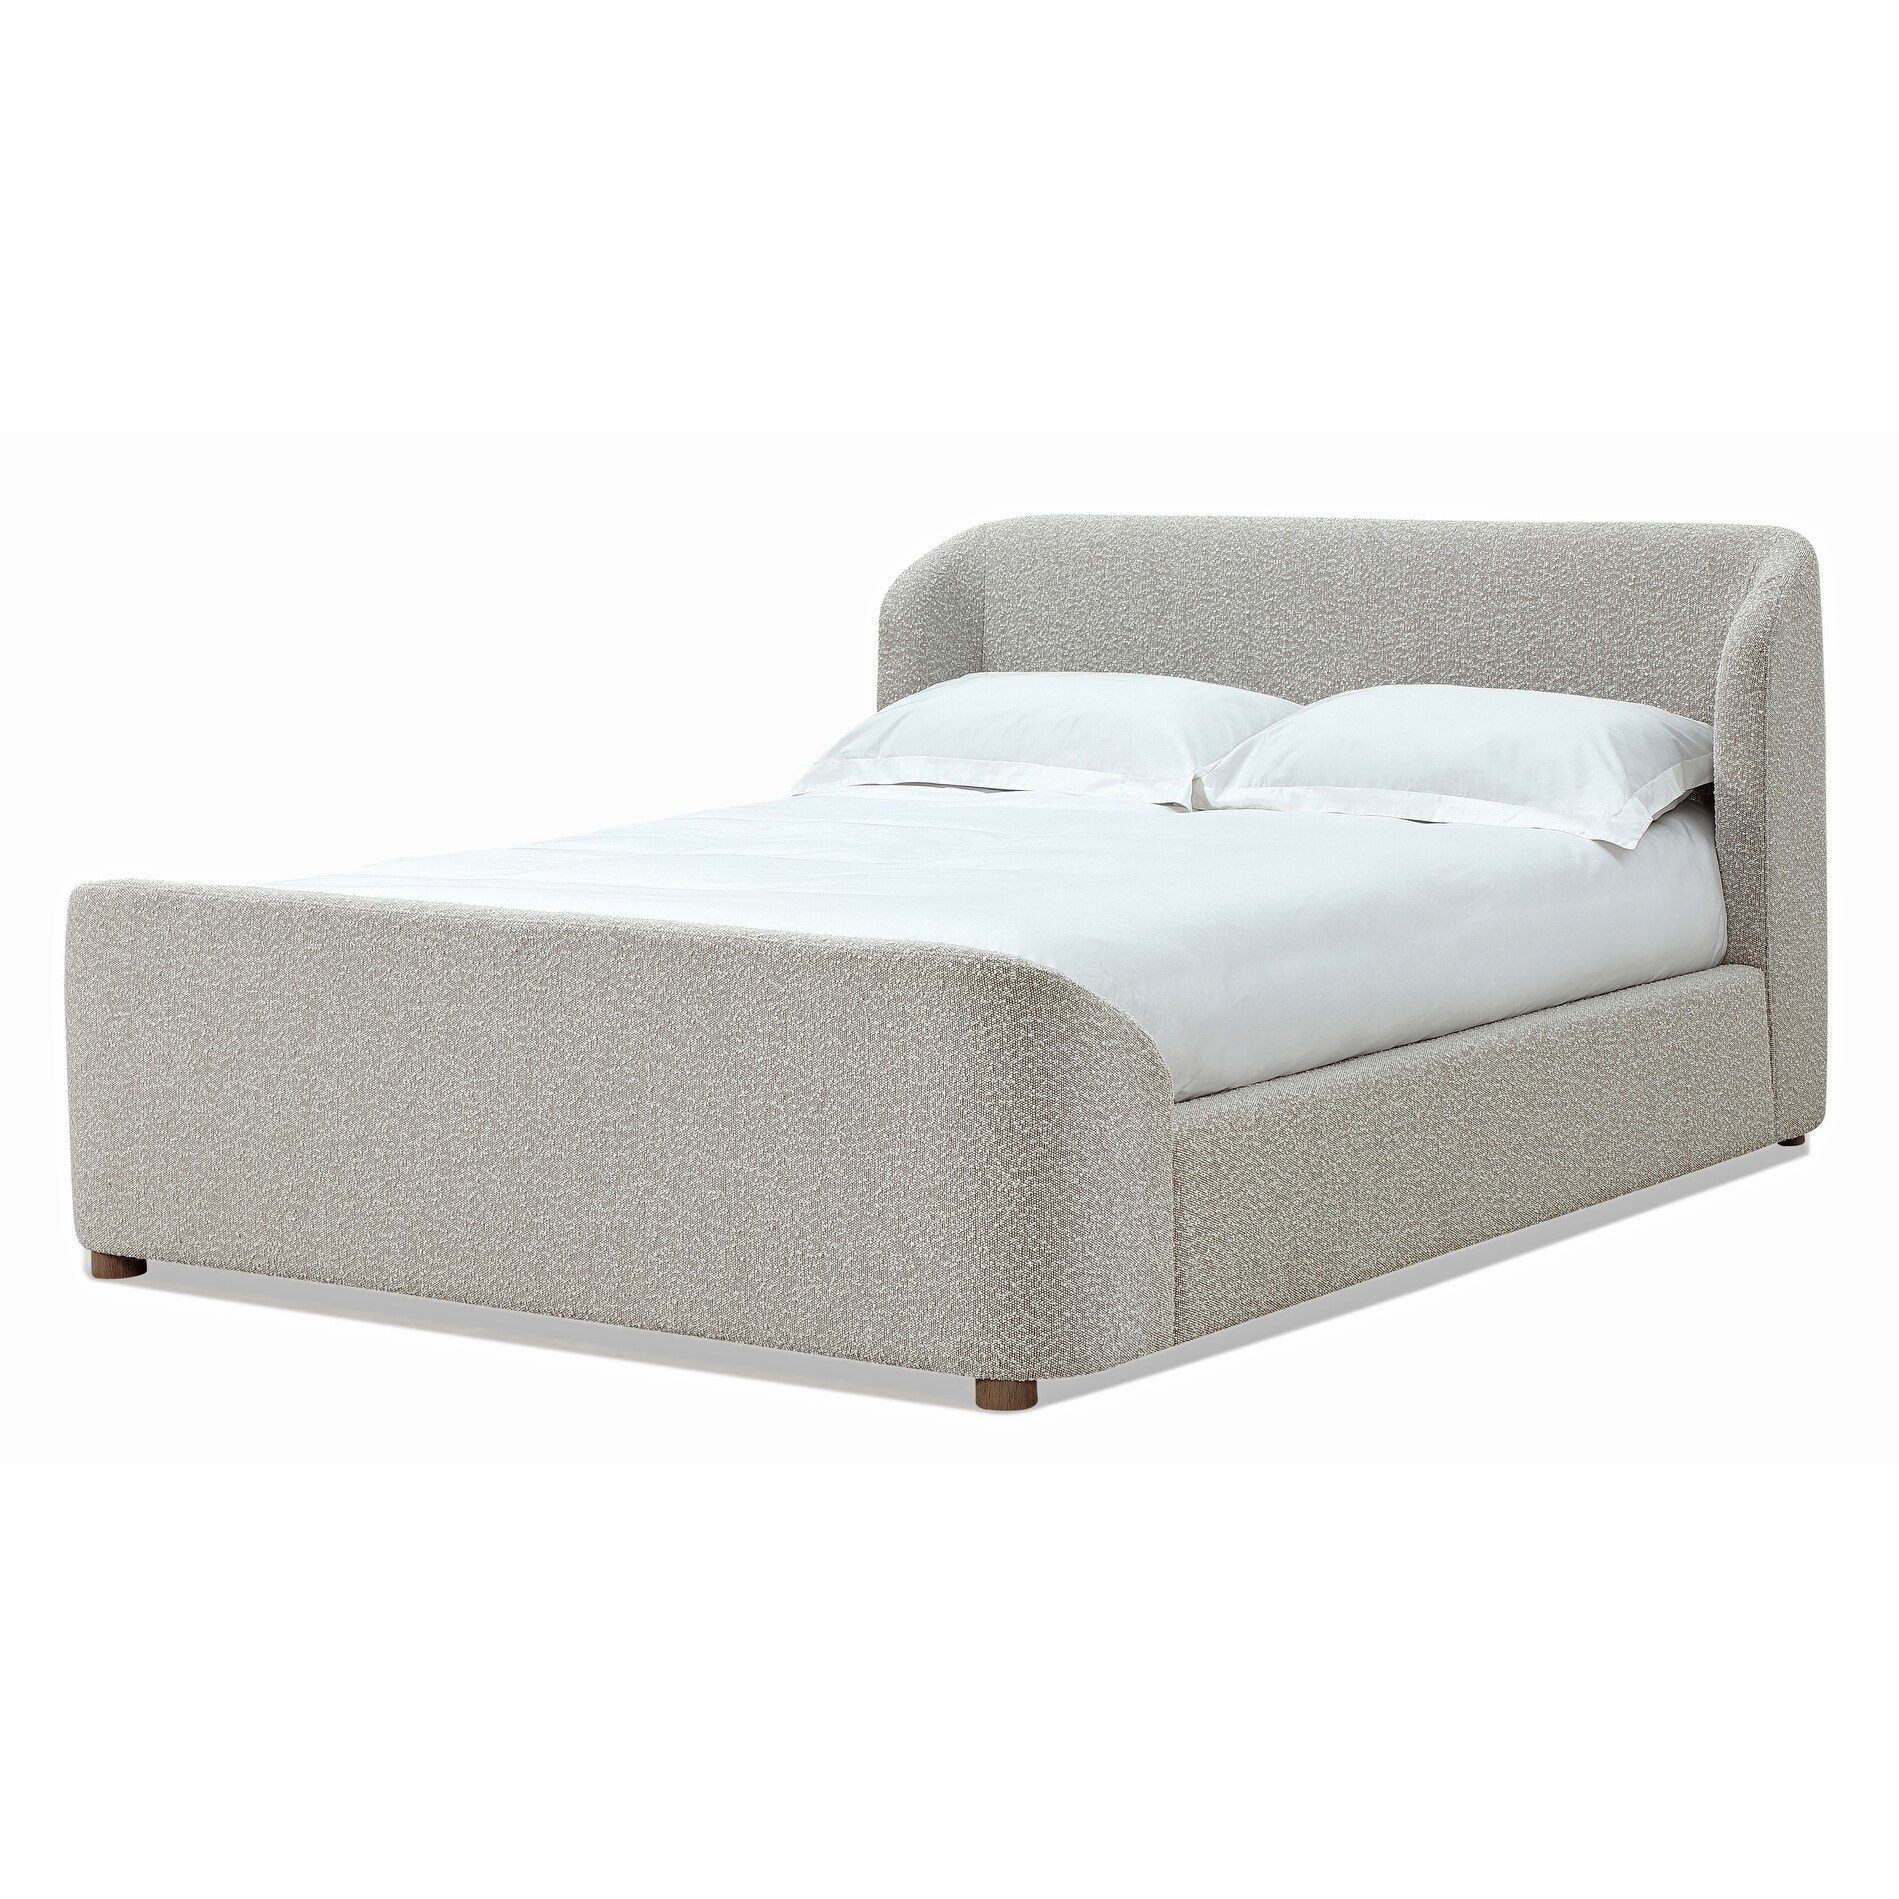 Kiki Upholstered Platform Bed in Cotton Ball Boucle